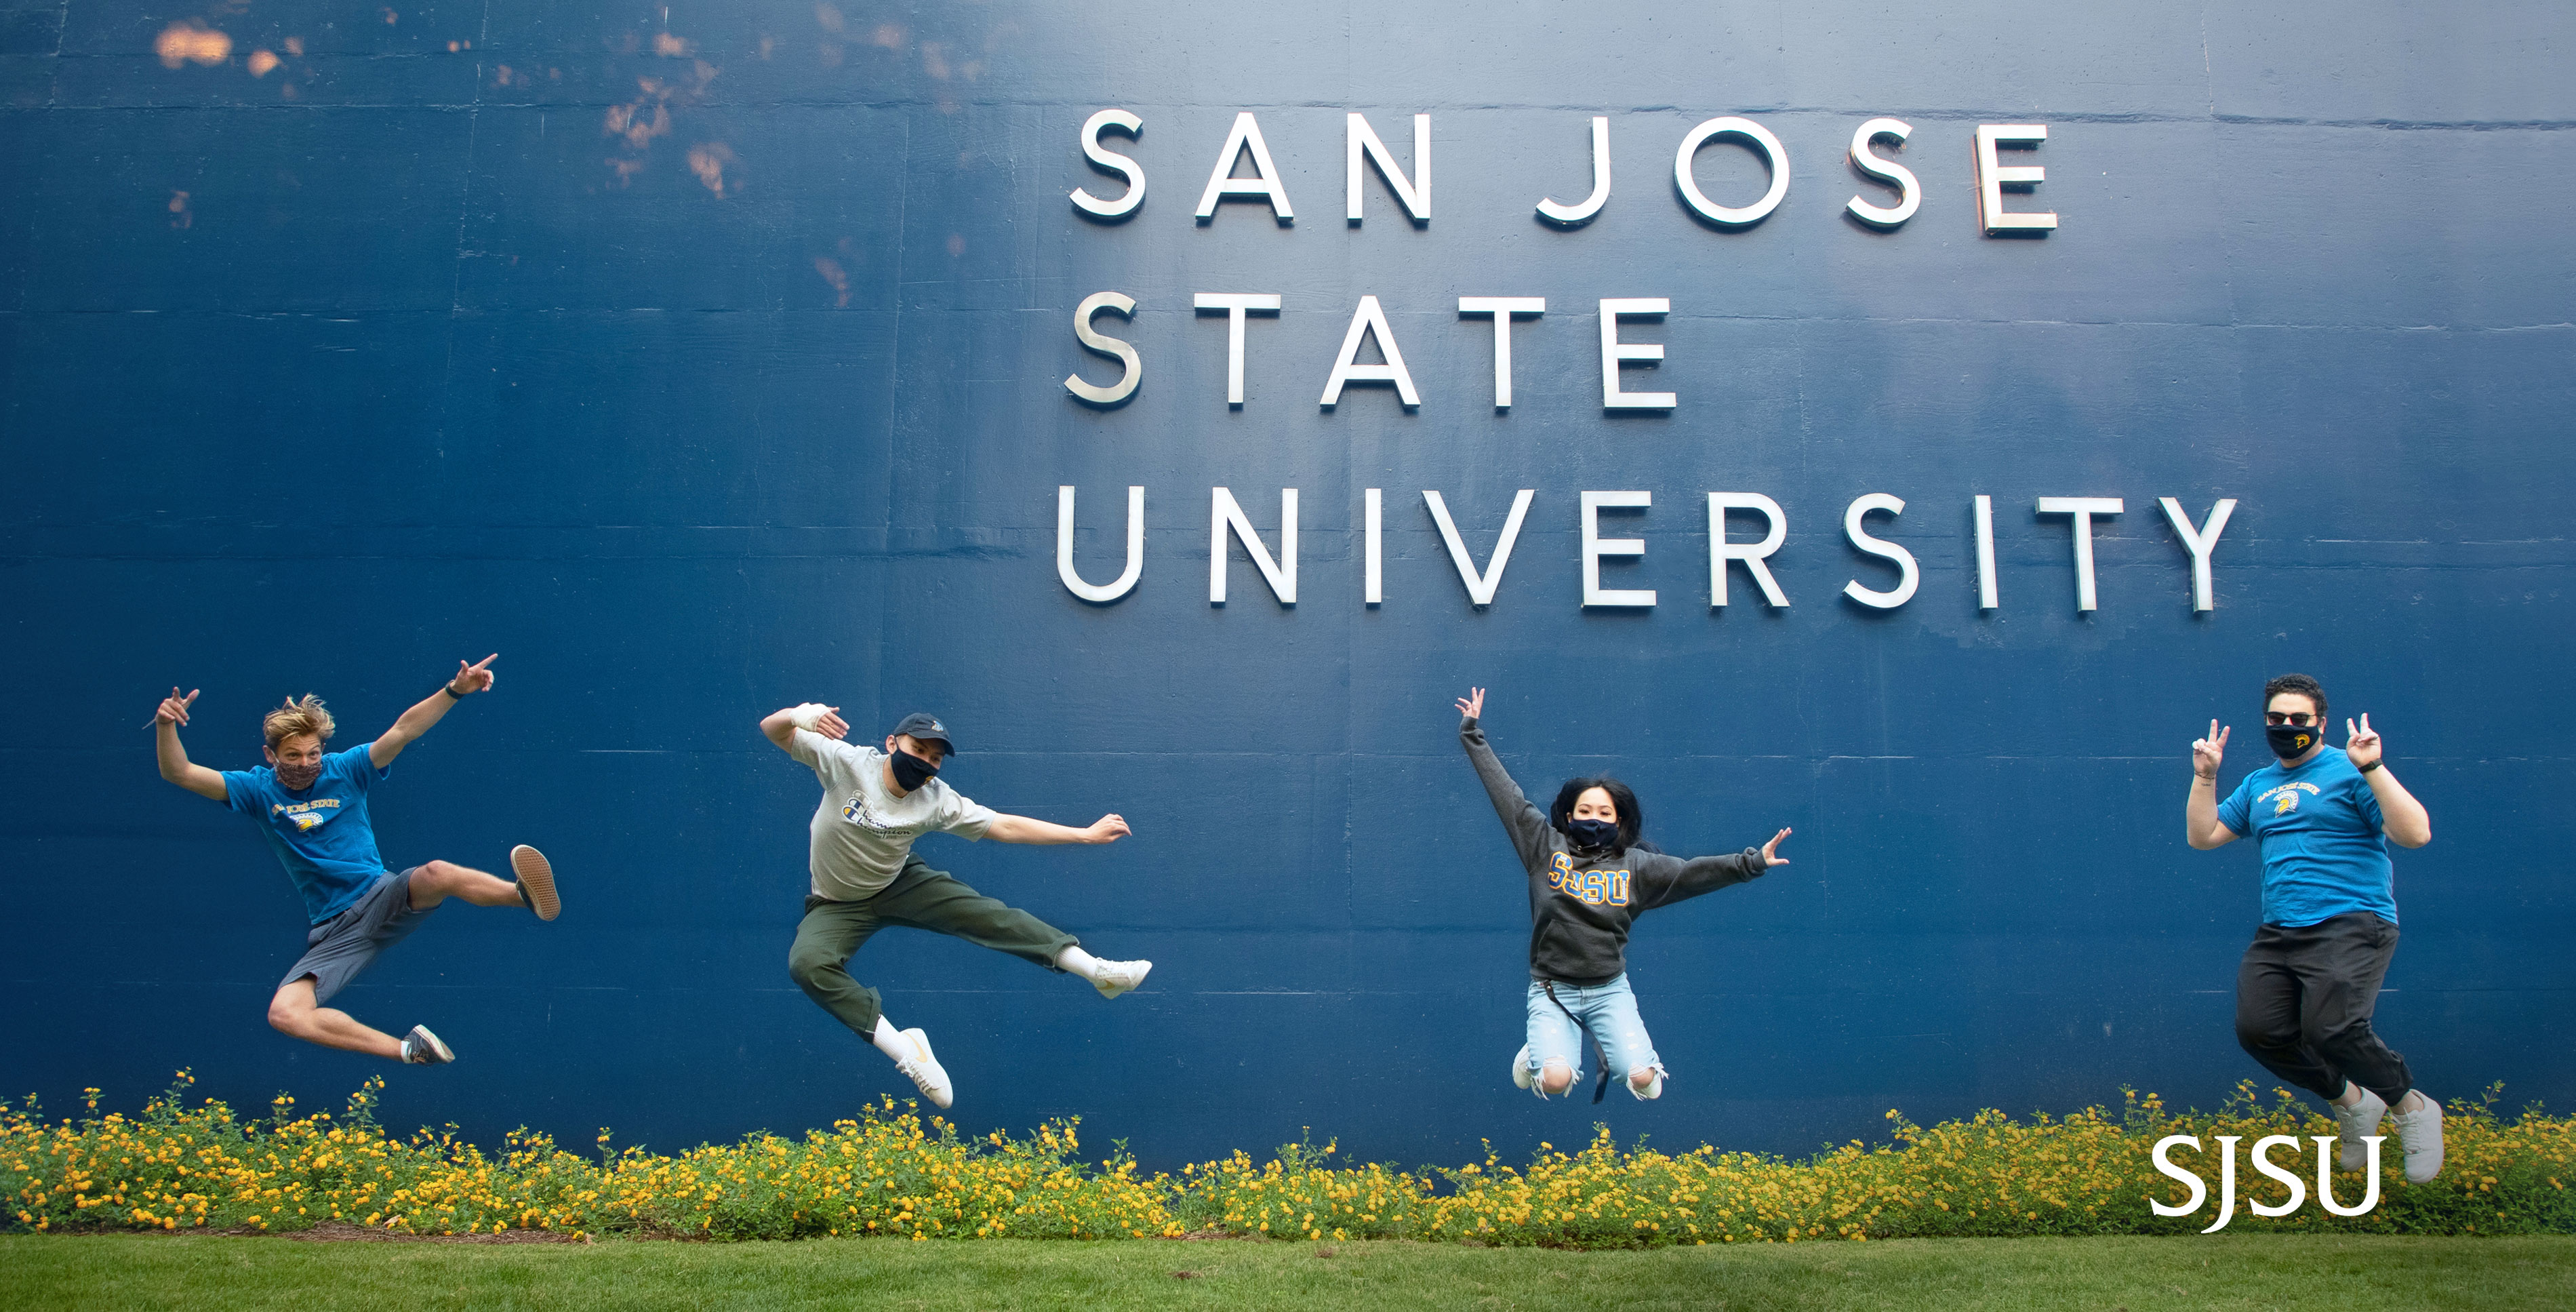 Students jumping with SJSU name in background on building